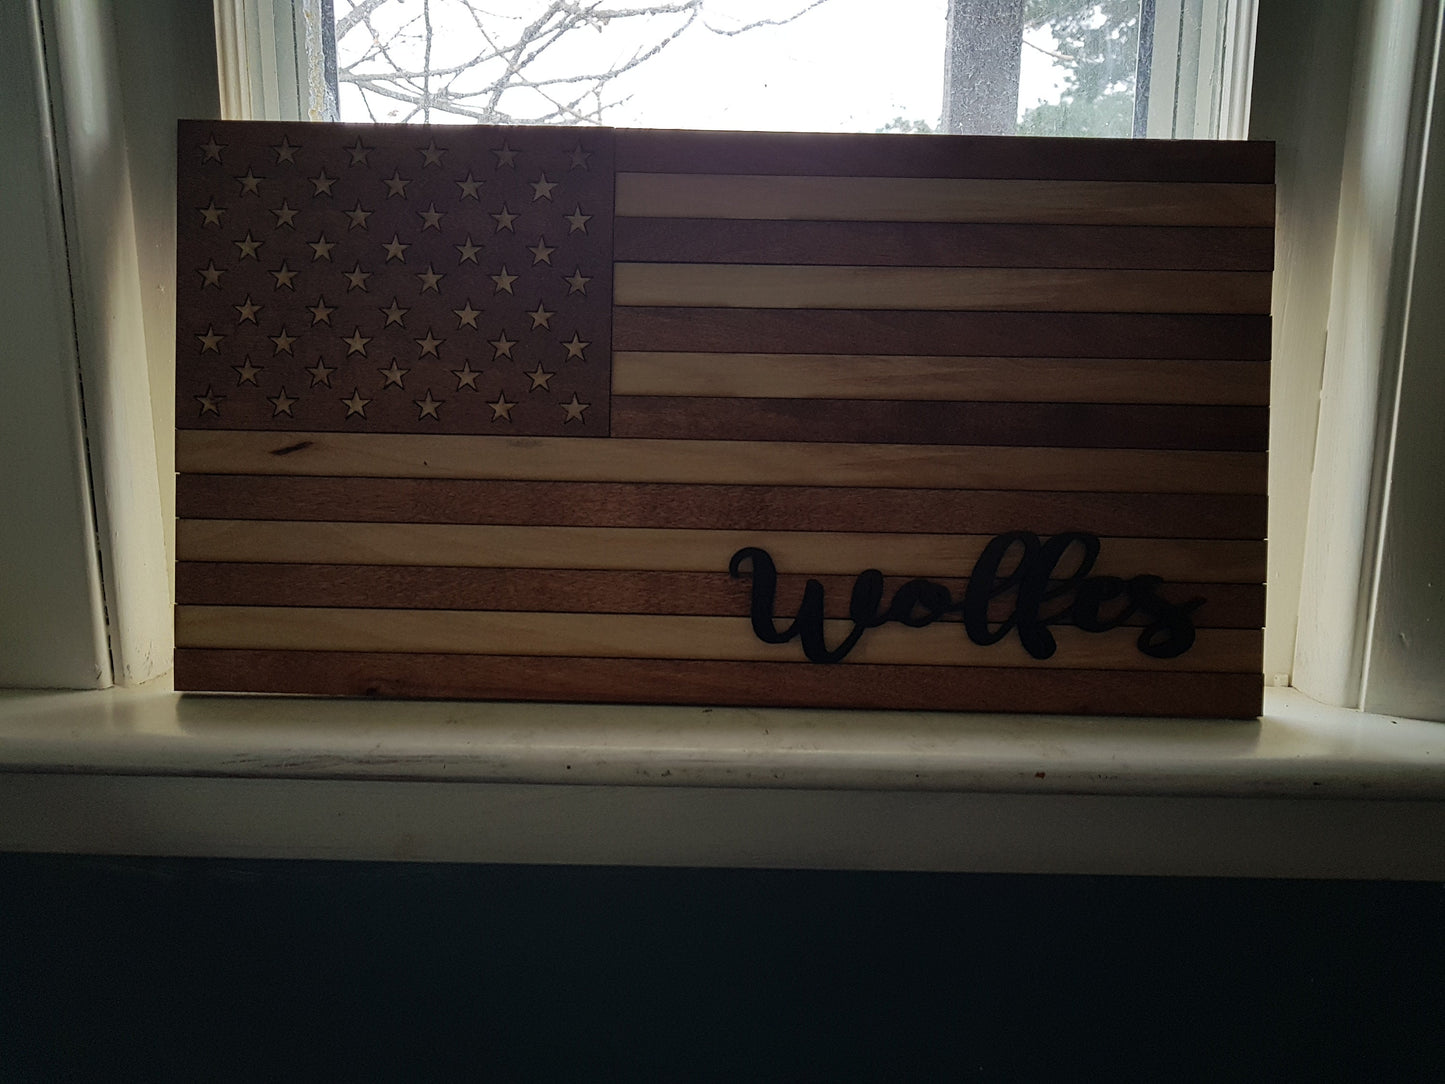 Flag, Rustic Primitive, American Flag Wood Sign, Family Name Sign, Patriotic, Stars and Stripes, Independence Day, Custom, Wood, Laser